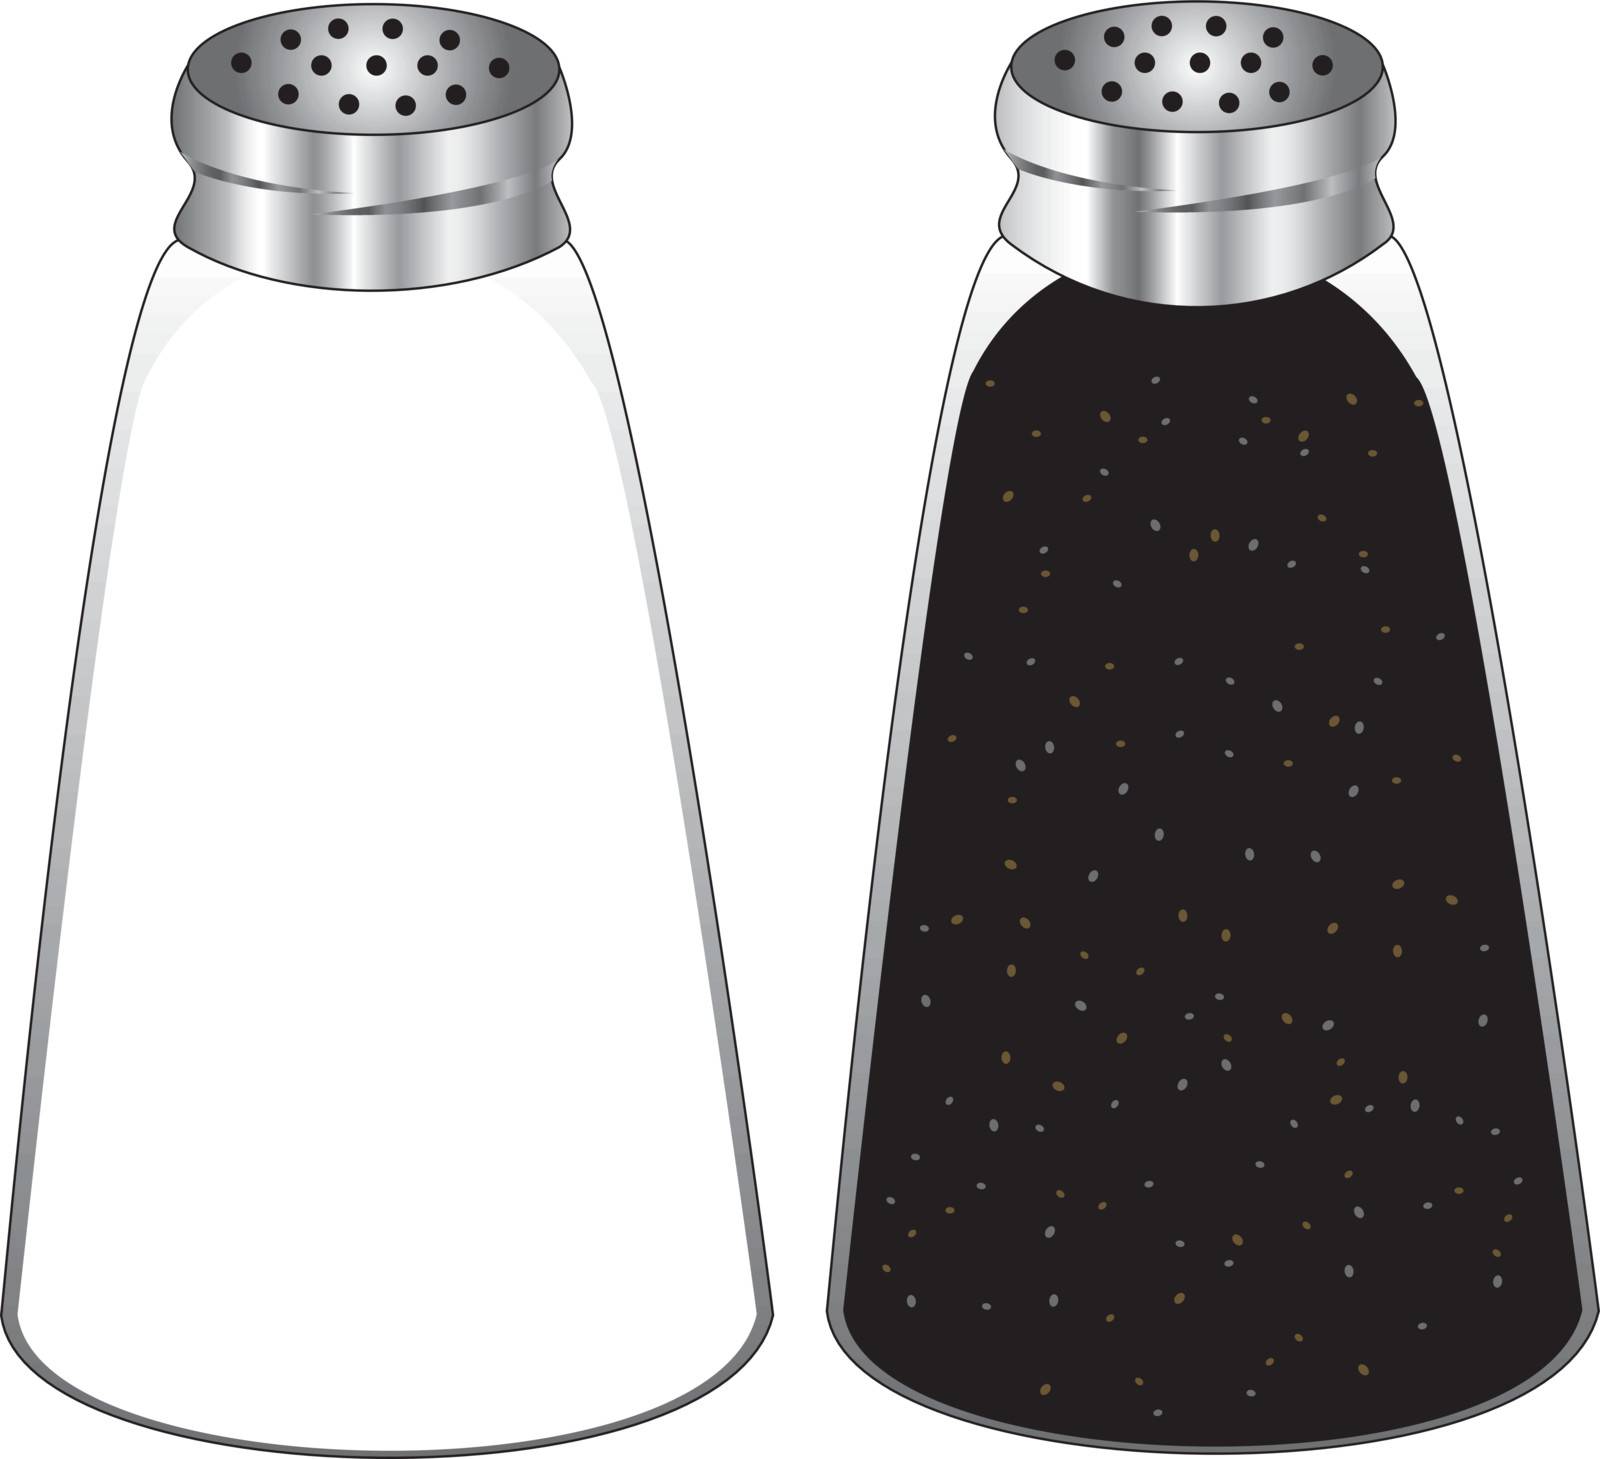 Vector Illustration of pepper and salt shakers isolated.